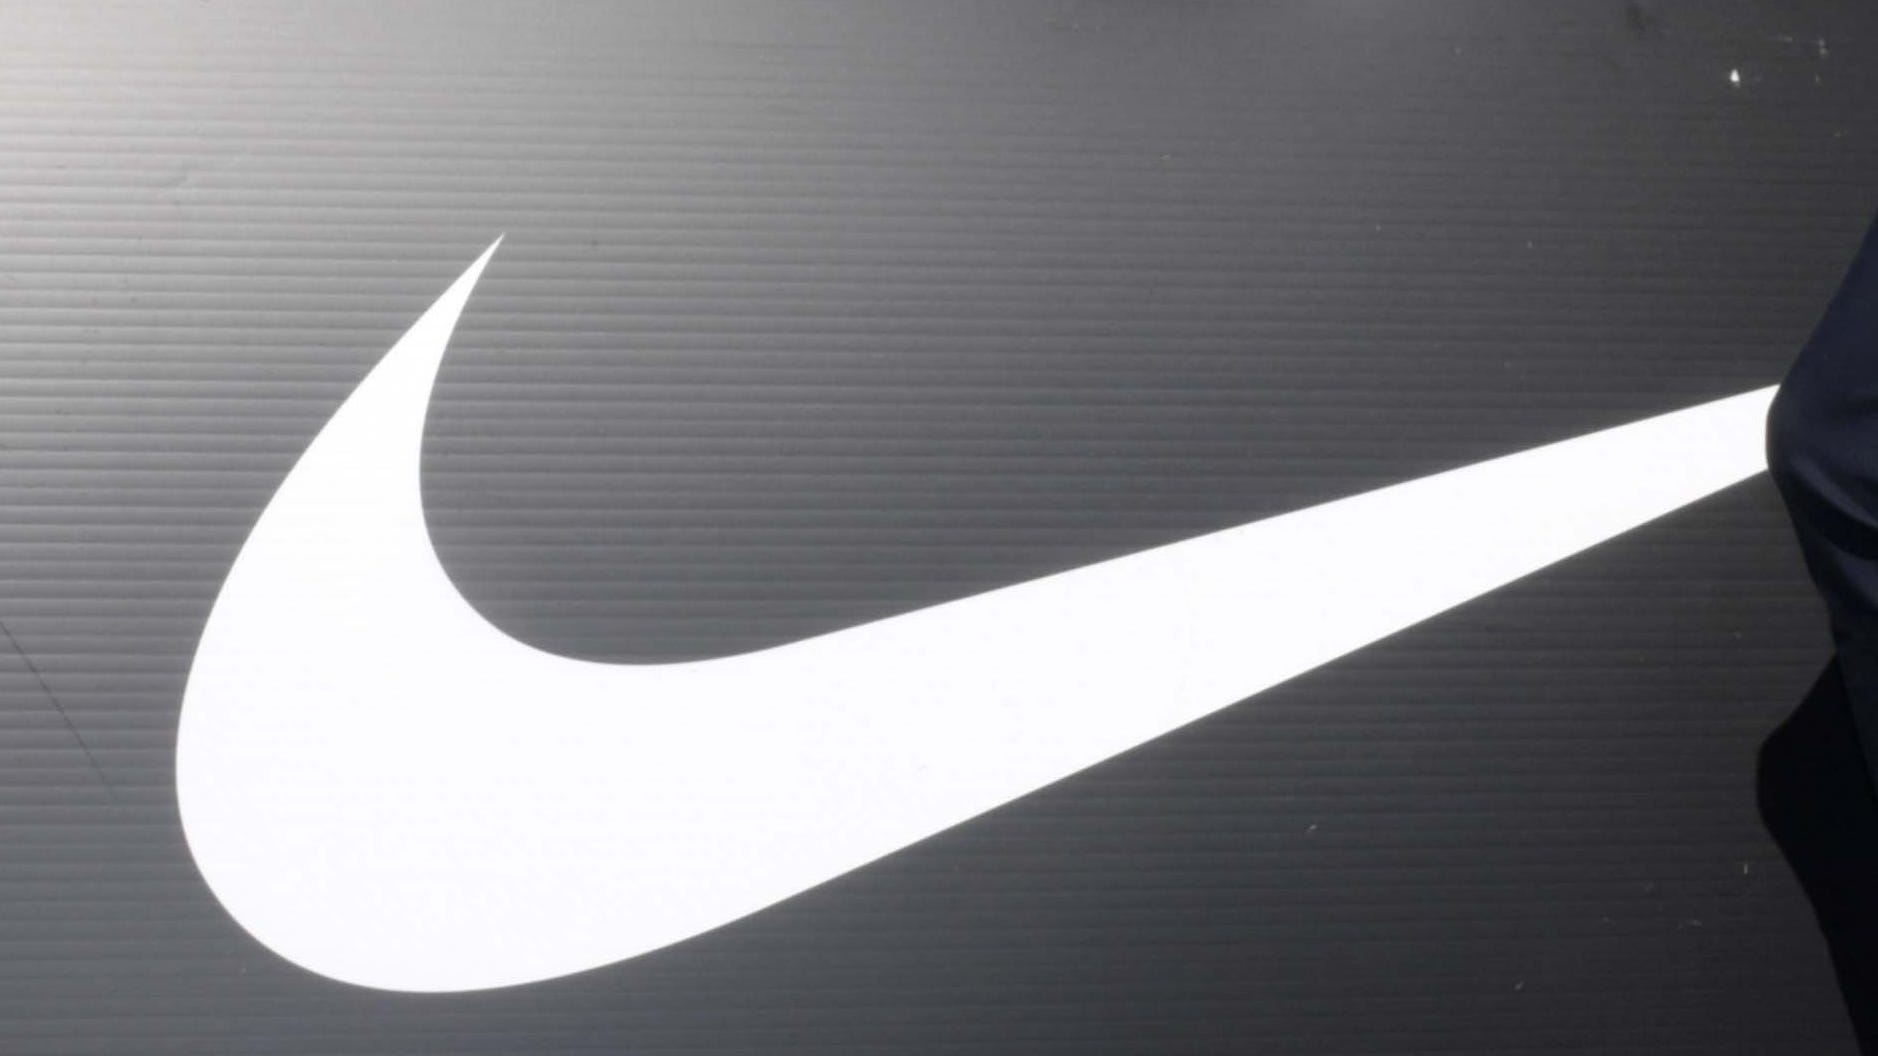 Nike ad addresses racism in wake of protests: 'For once, don't do it'